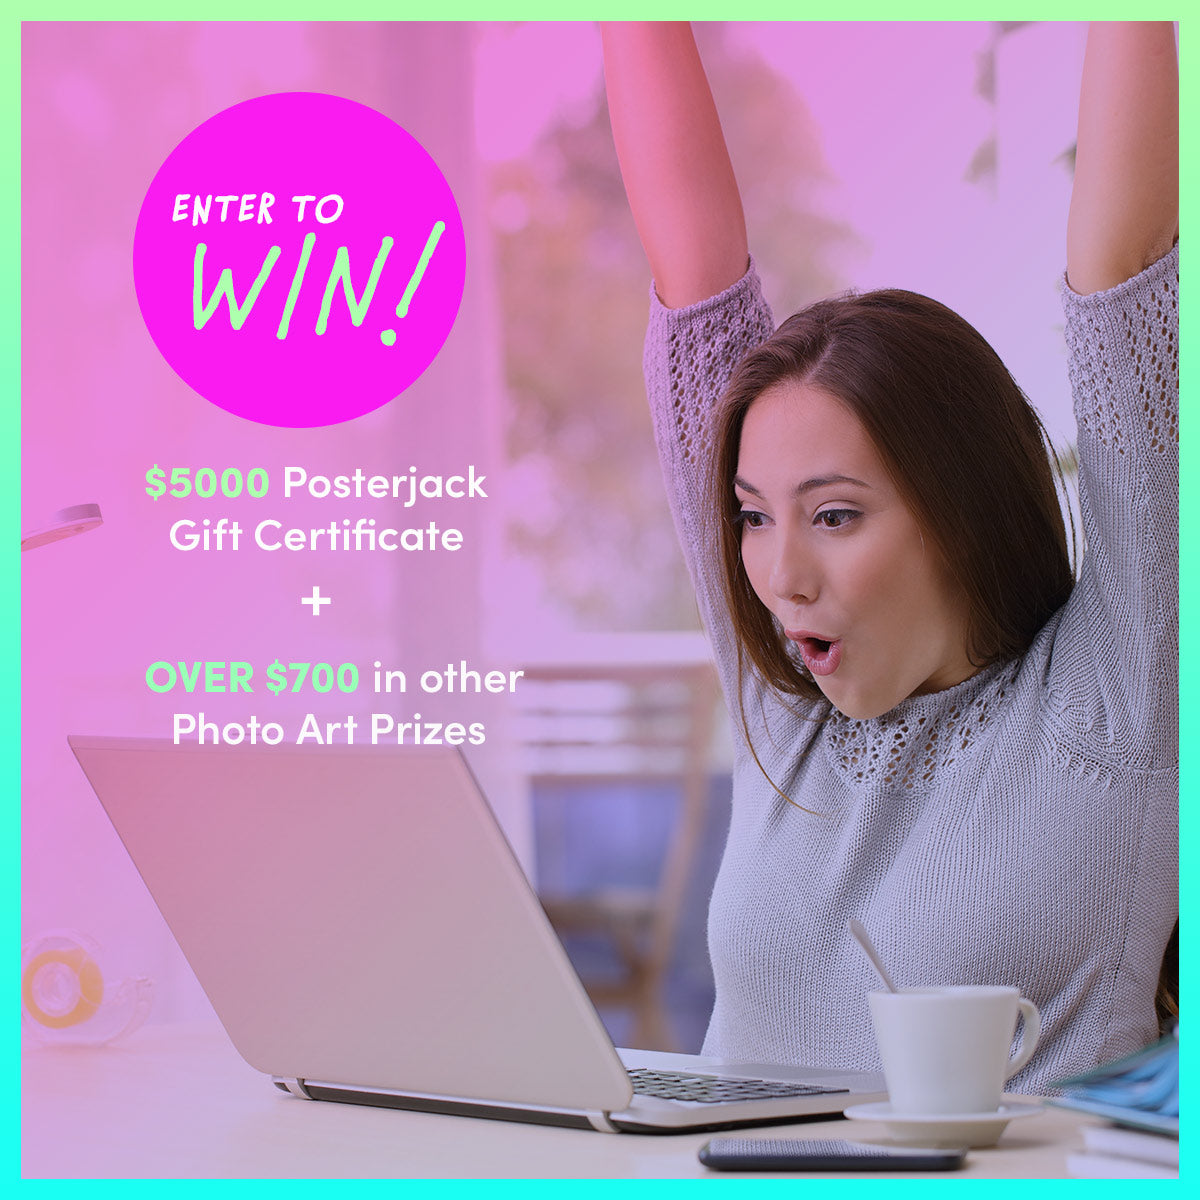 Enter to Win a $5000 Posterjack Gift Certificate + Other Photo Art Prizes